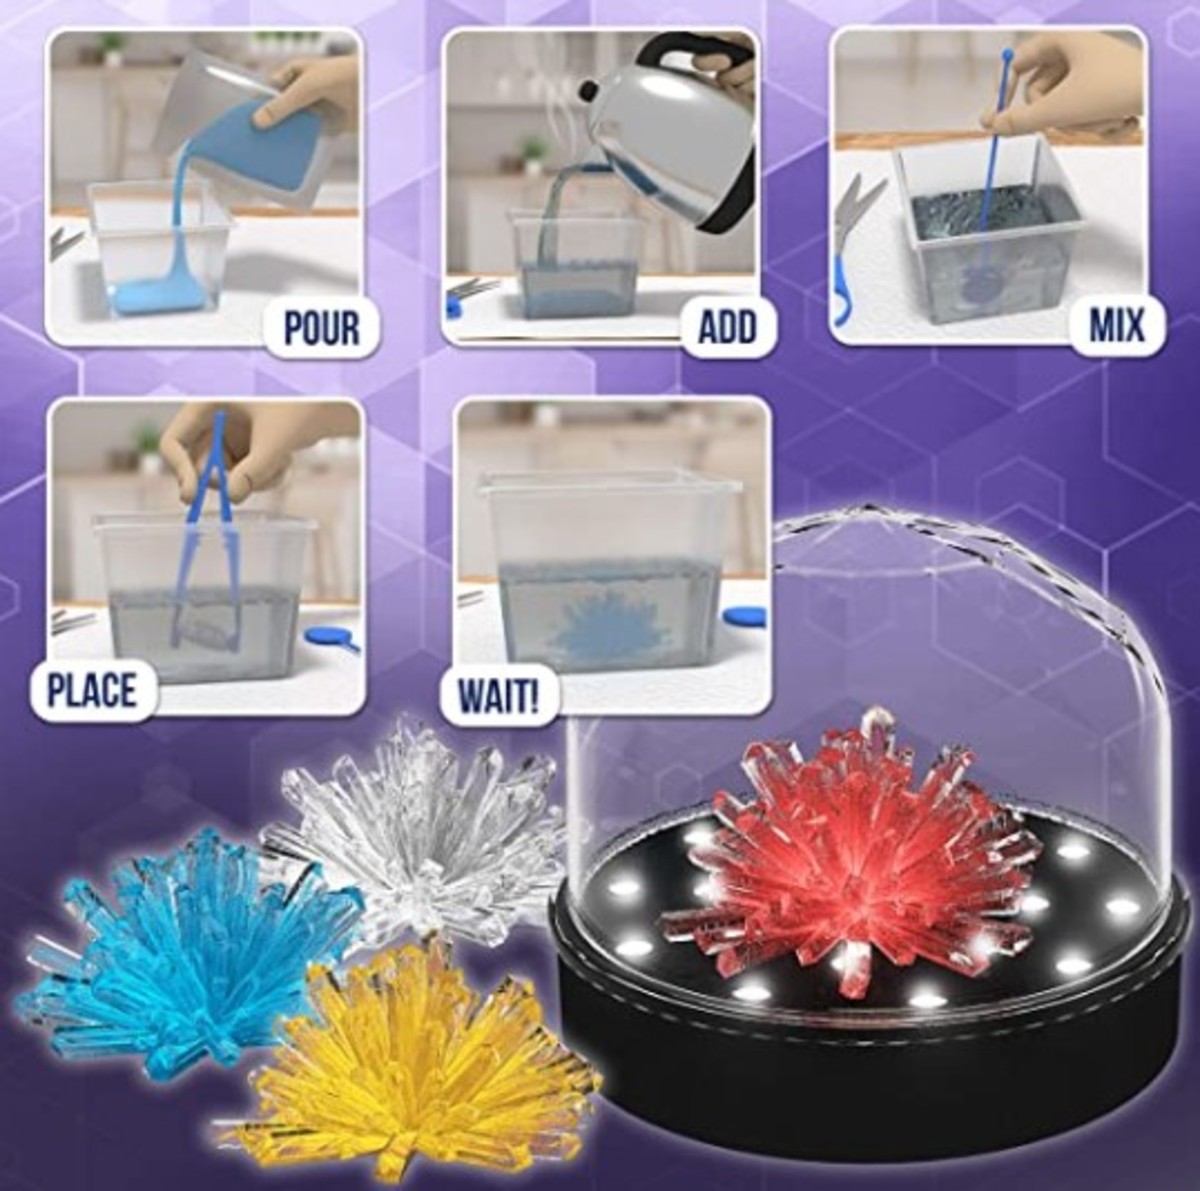 Crystal growing kit with a light-up display dome gives your kid a better understanding of the geological processes.